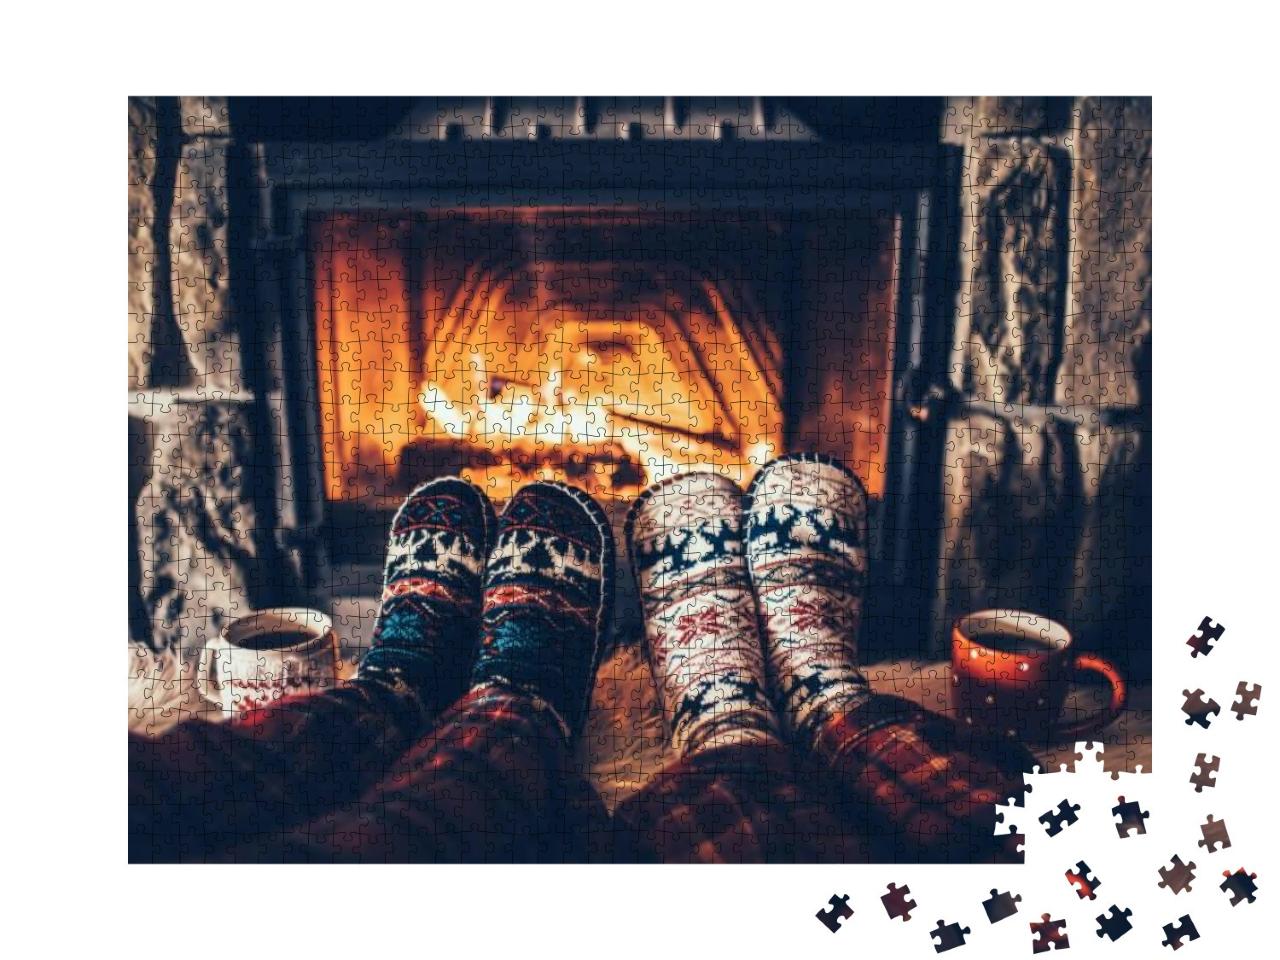 Feet in Woolen Socks by the Christmas Fireplace. Couple S... Jigsaw Puzzle with 1000 pieces